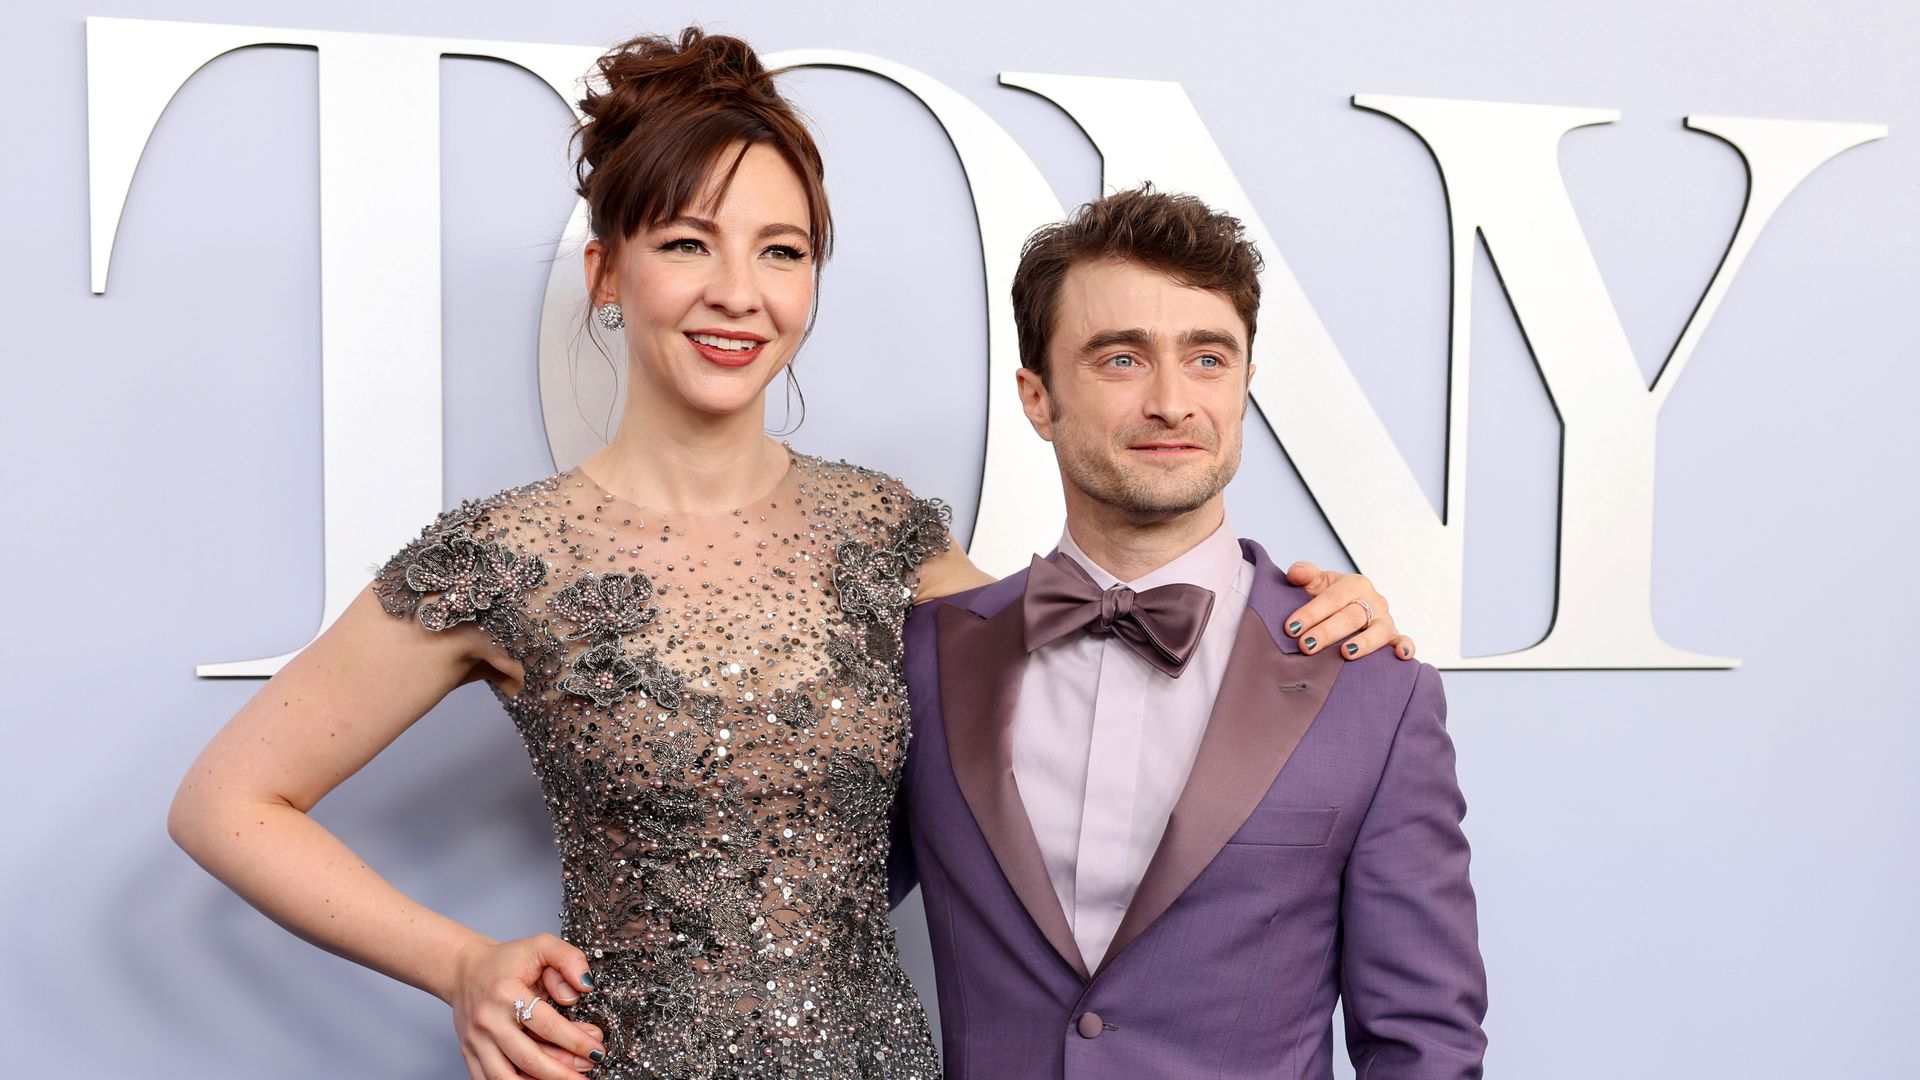 Daniel Radcliffe's private life with Erin Darke and their young son